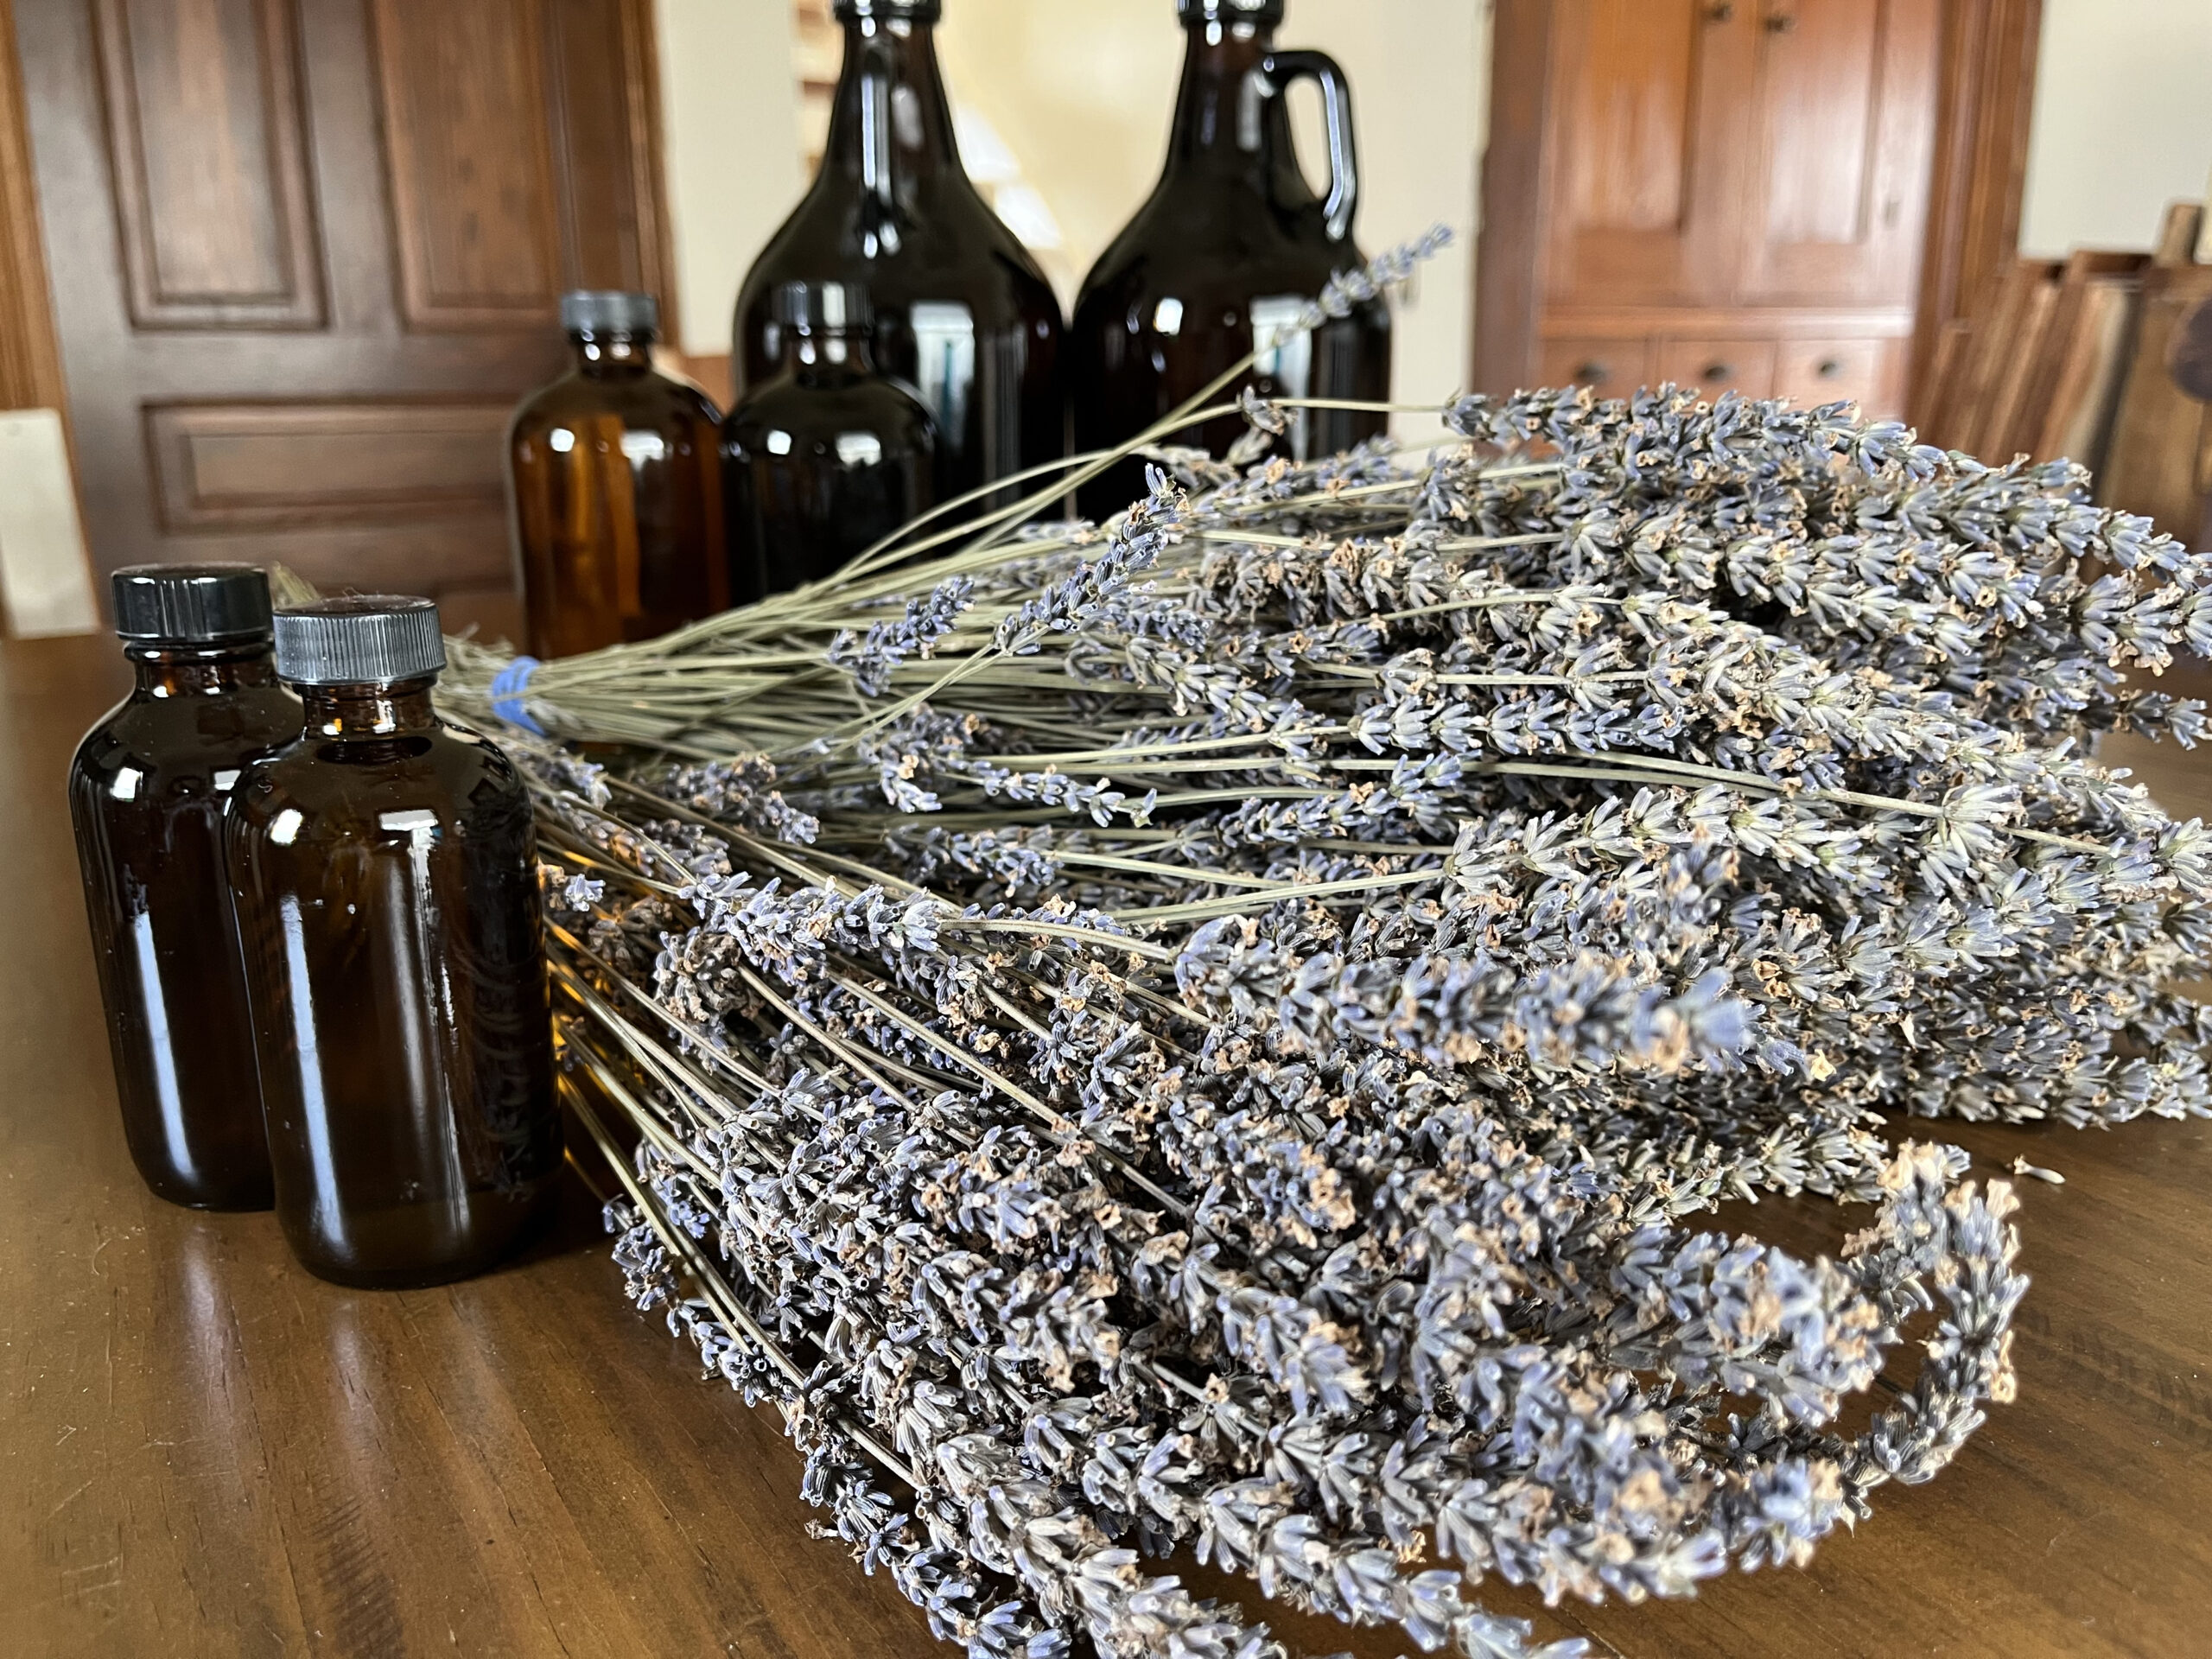 Dried lavender with dark bottles behind and wooden doors in the background. Grown on "Ocimeae Lavender Farm"